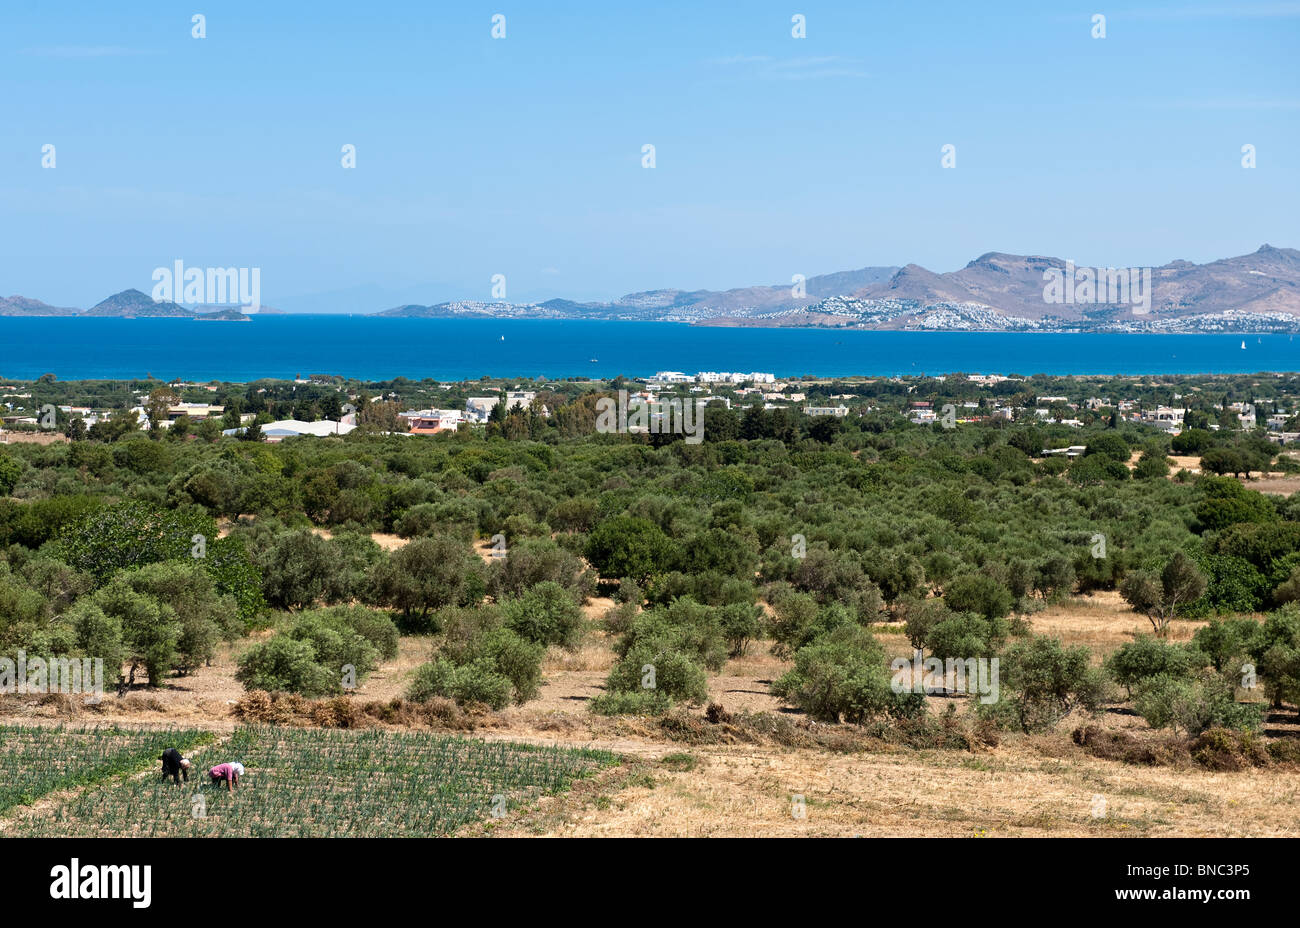 Greece, Dodecanese, Kos, view on the island from Zia village Stock Photo